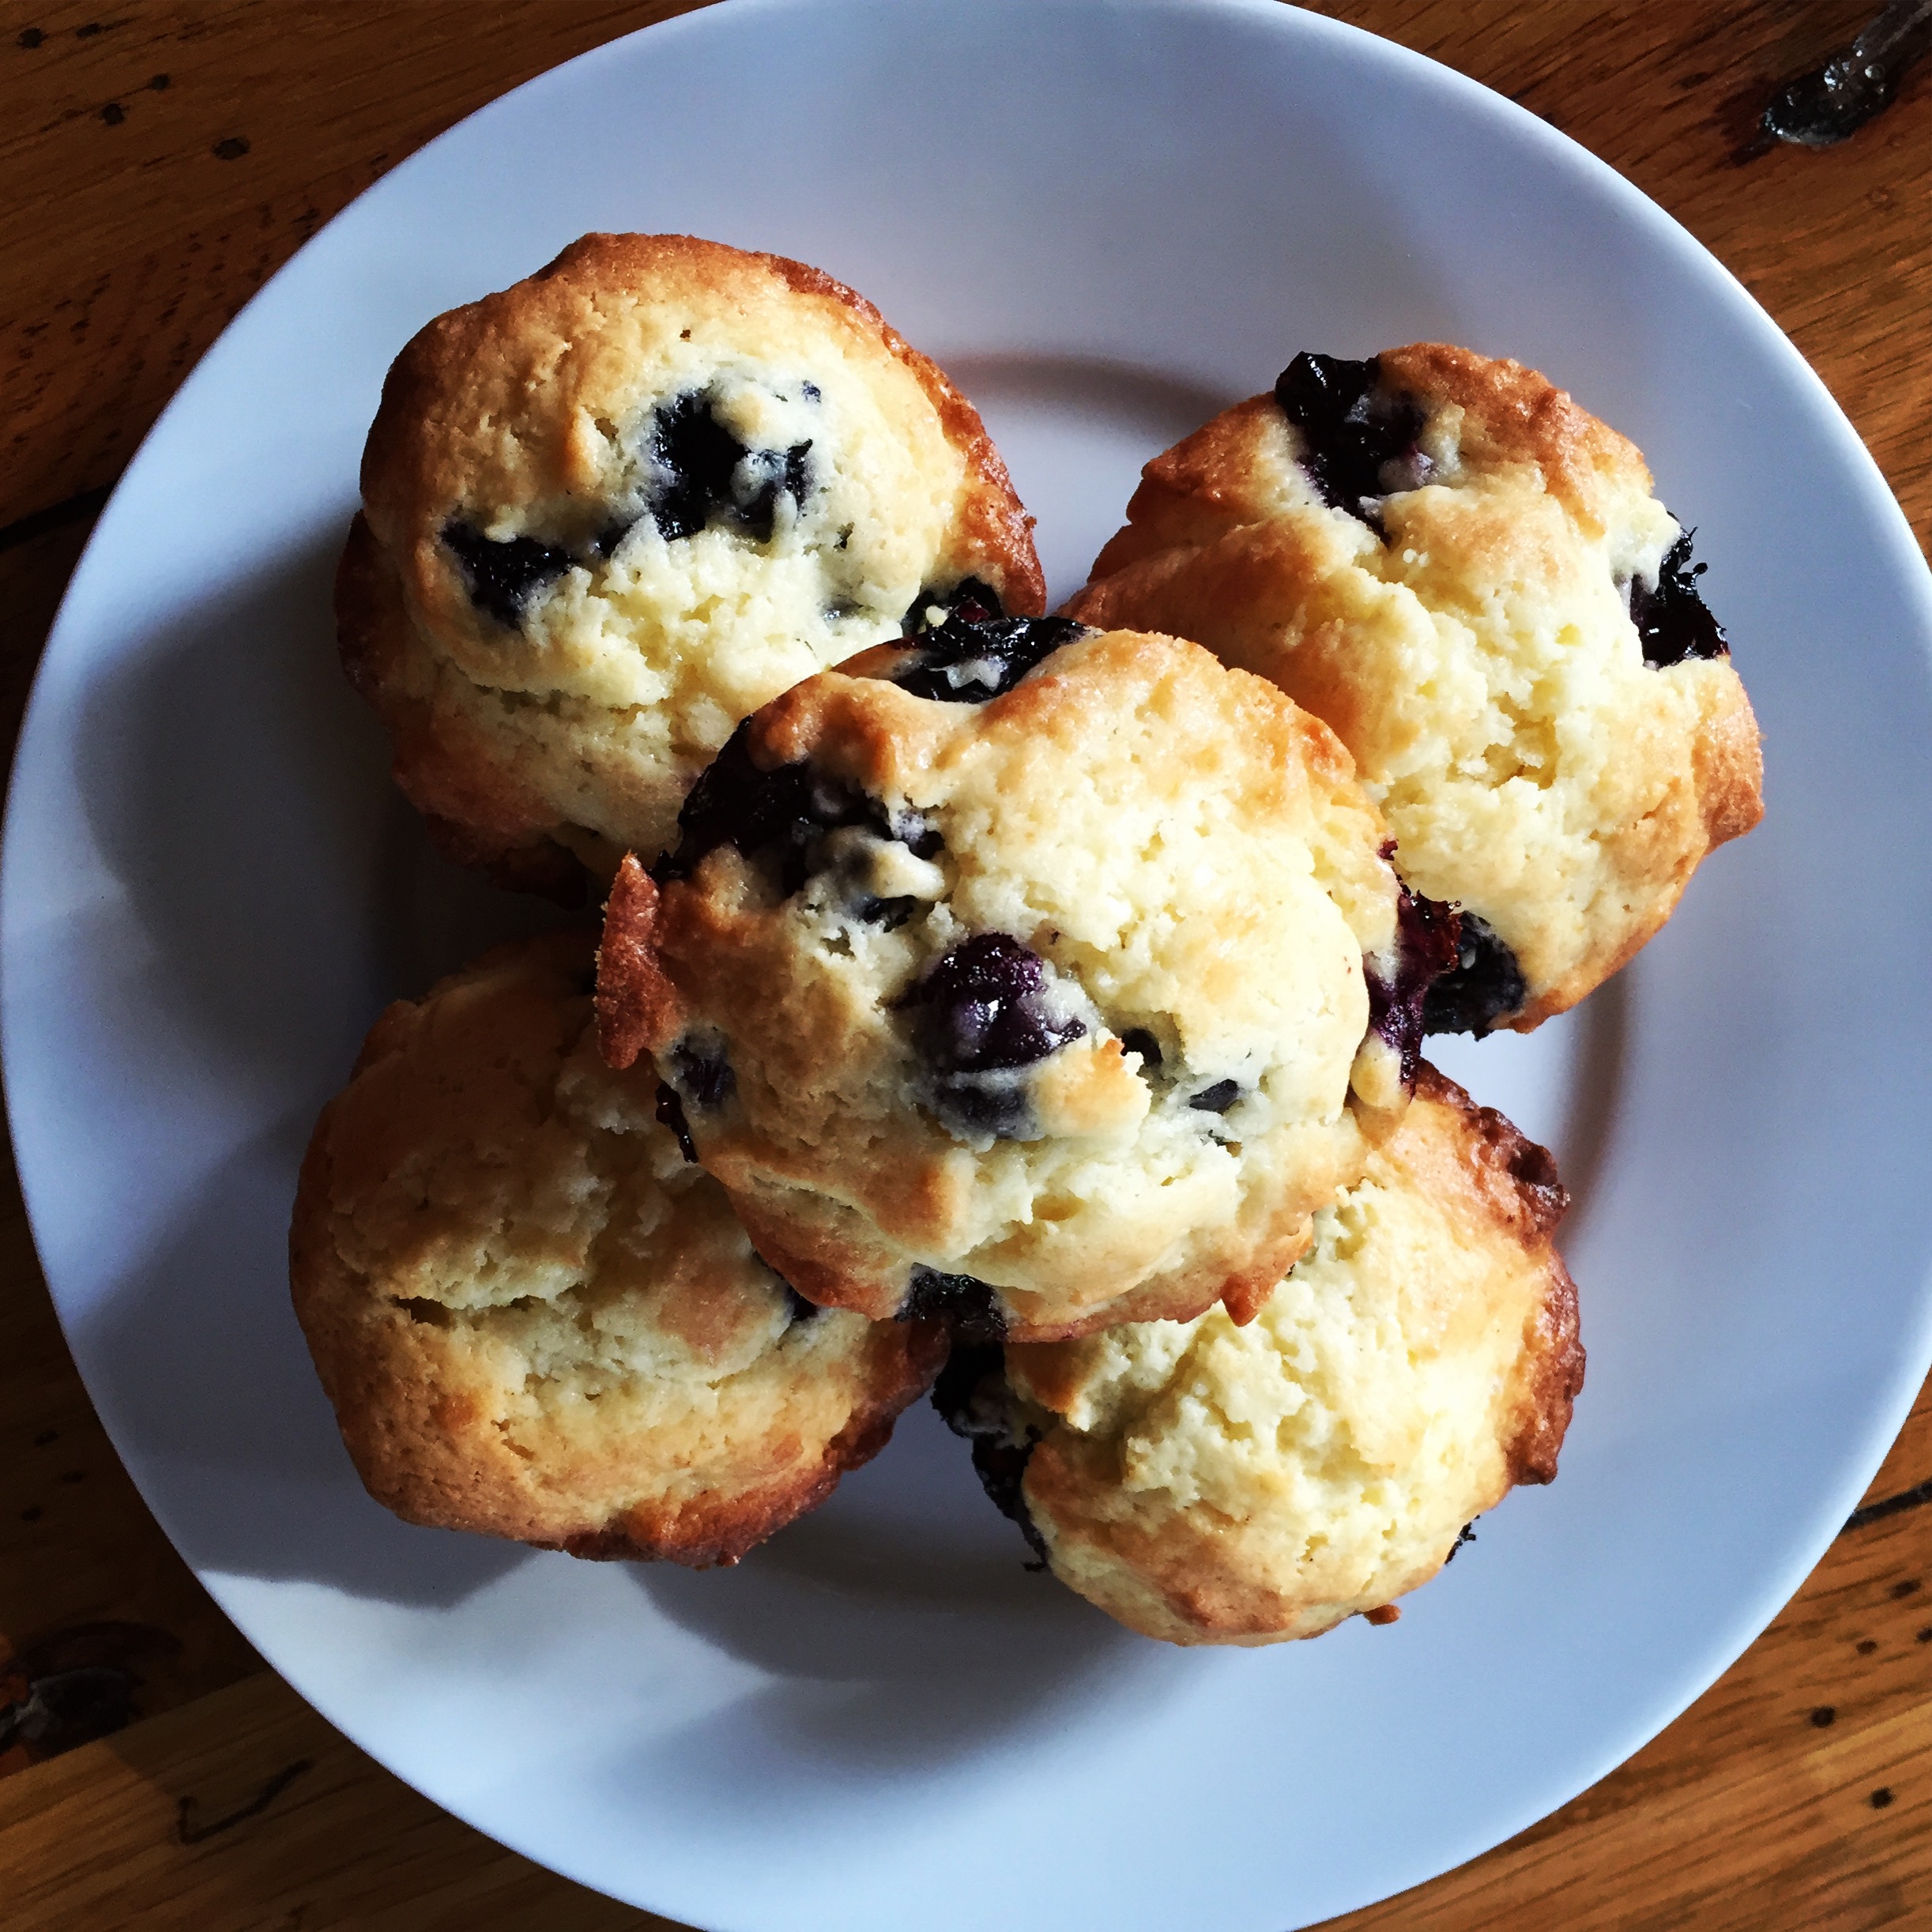 Wild Blueberry Muffins by Sonia Hunt